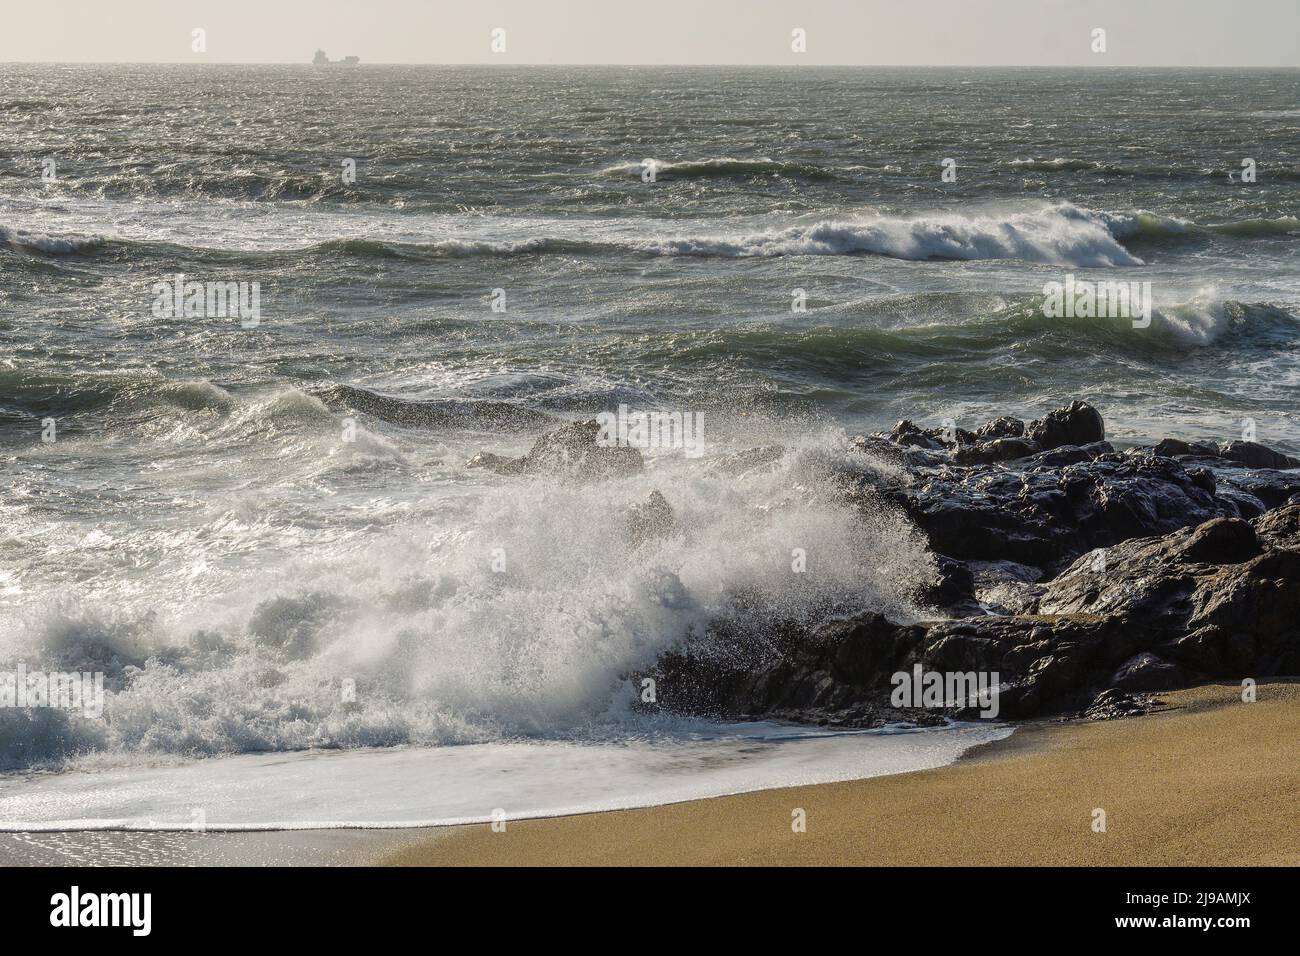 Waves breaking on the rocks of the beach Stock Photo